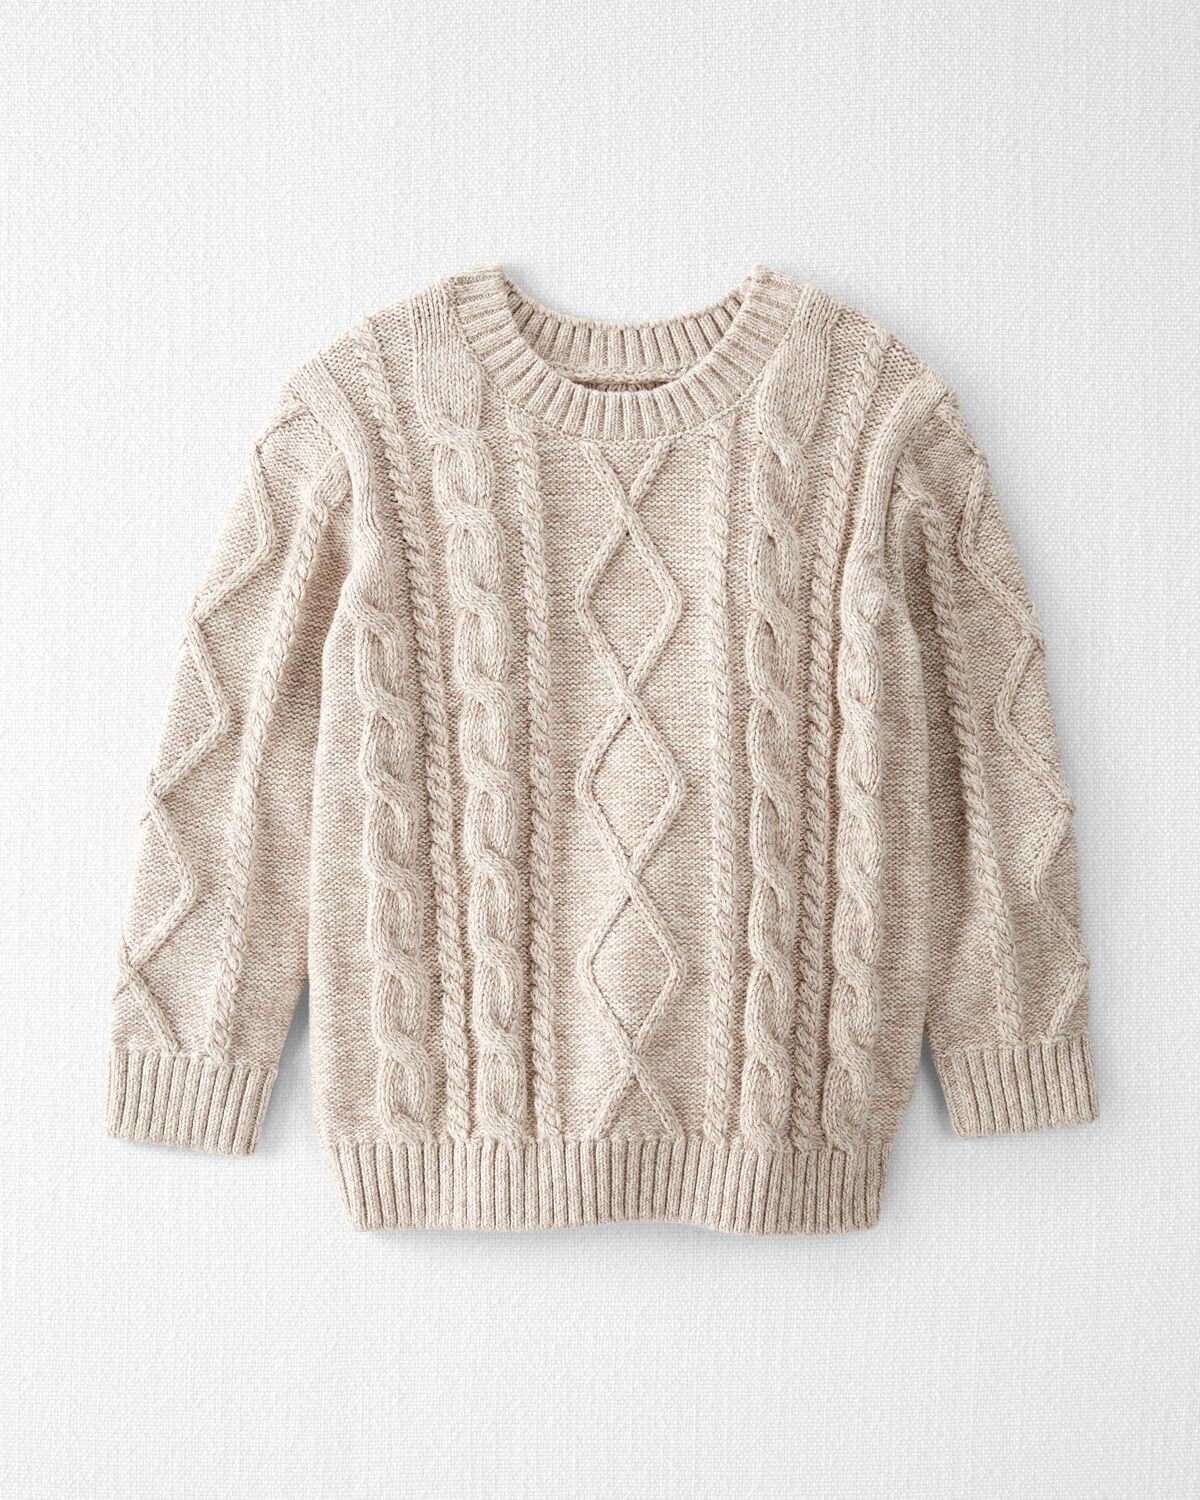 Toasted Wheat Toddler Organic Cotton Cable Knit Sweater | carters.com | Carter's